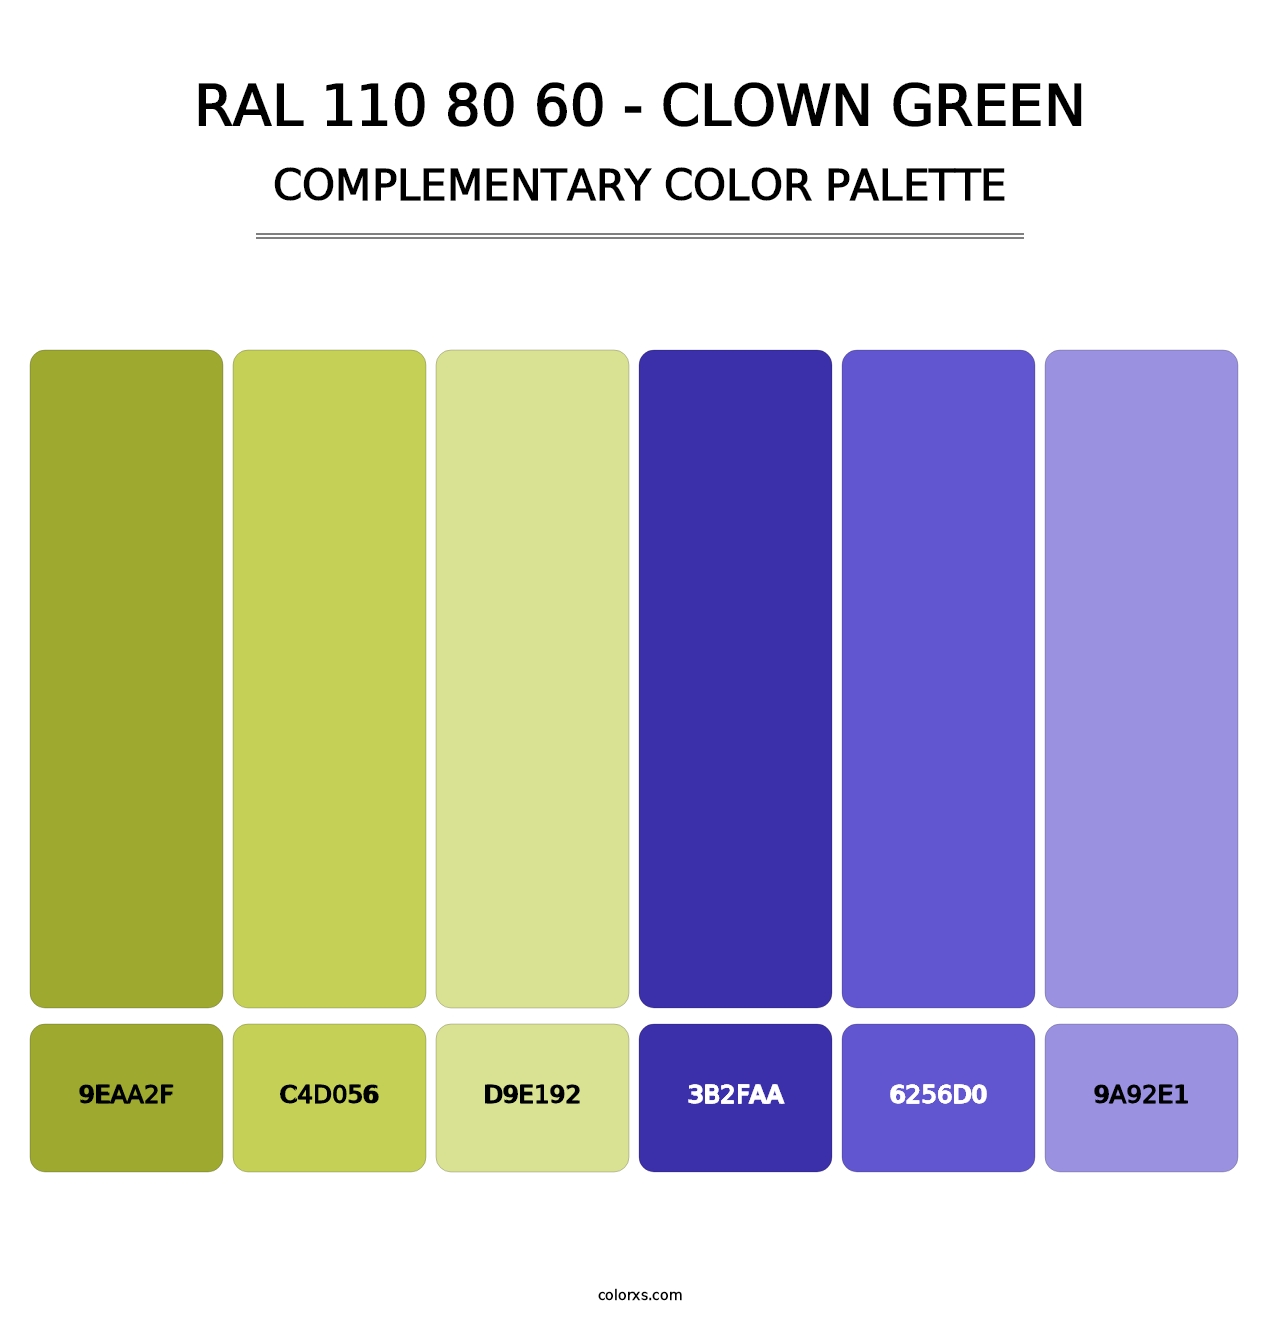 RAL 110 80 60 - Clown Green - Complementary Color Palette